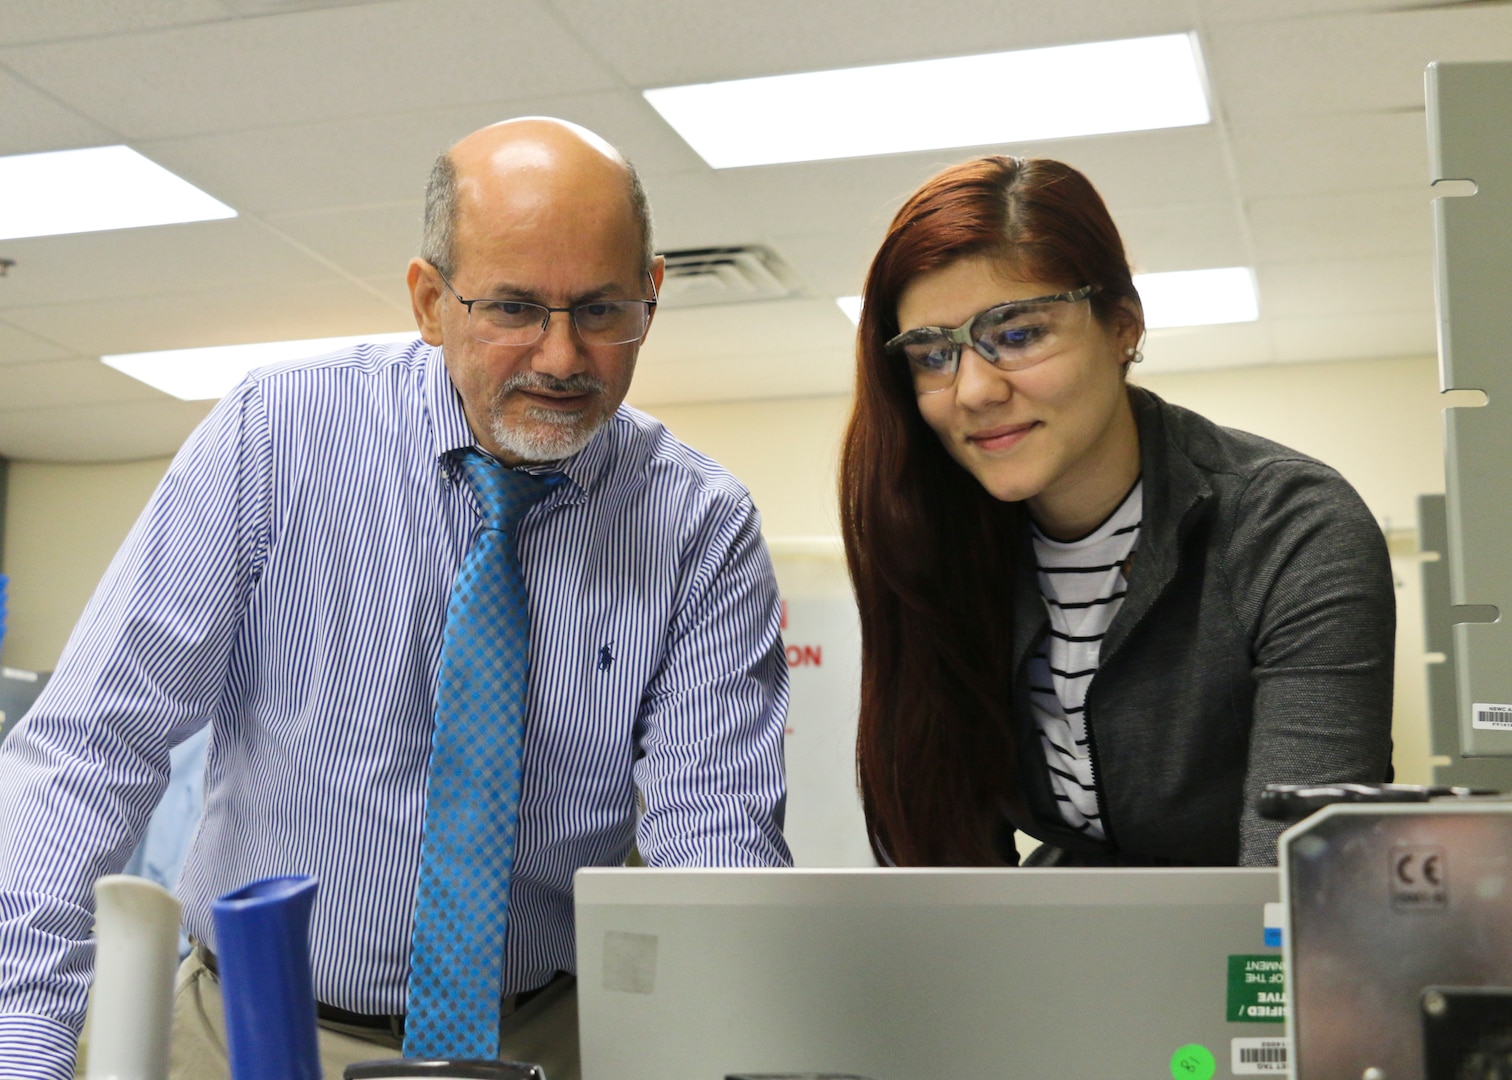 NSWC Philadelphia Division Wastewater In-Service Engineering branch head Ramon “Tony” Morales mentoring Gabriella Gonzalez Pascual while she was a coop intern in 2018 after Hurricane Maria swept through Puerto Rico. Morales’ mentorship has lead Gonzalez Pascual to become a full time NSWC Philadelphia Division employee. (U.S. Navy Photo by Keegan Rammel)